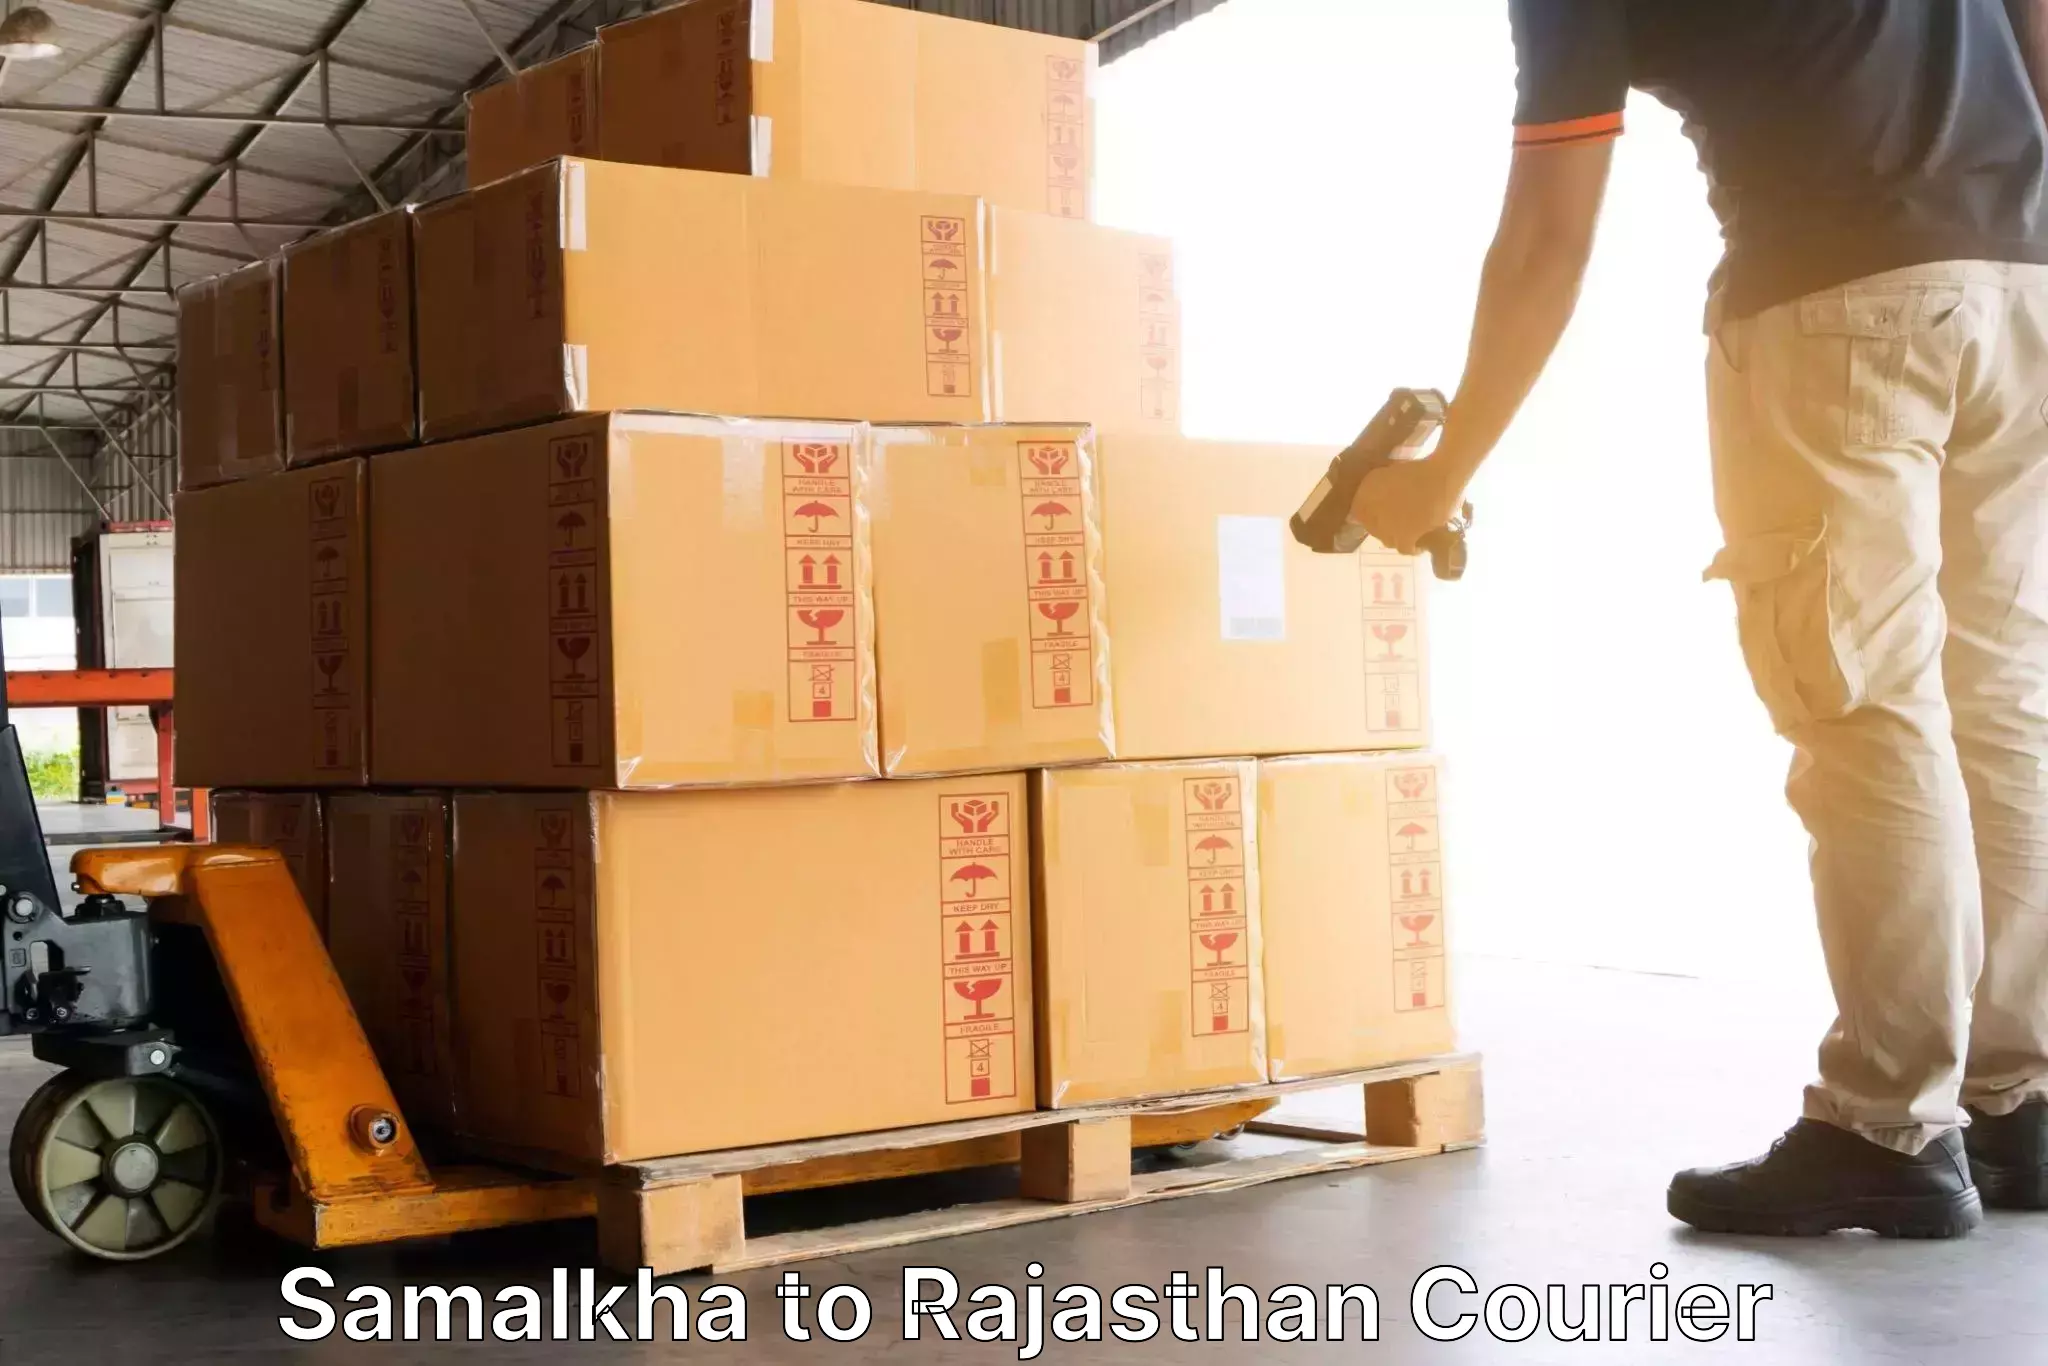 Courier service booking Samalkha to Rajasthan